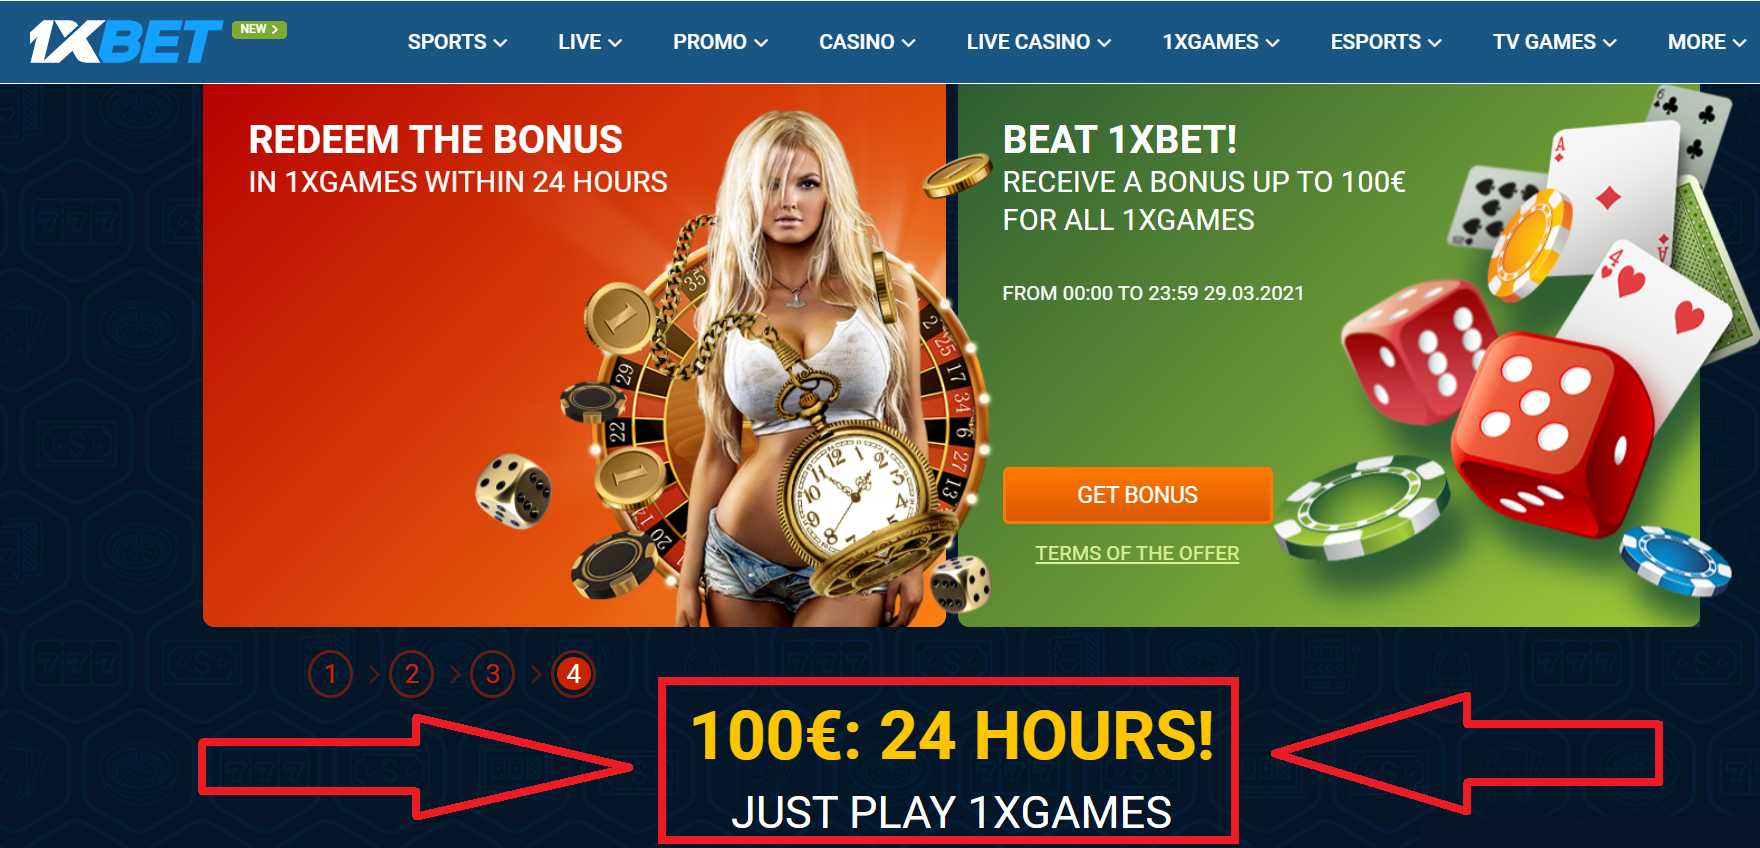 Peculiarities of the bonus terms and conditions that apply on 1xBet